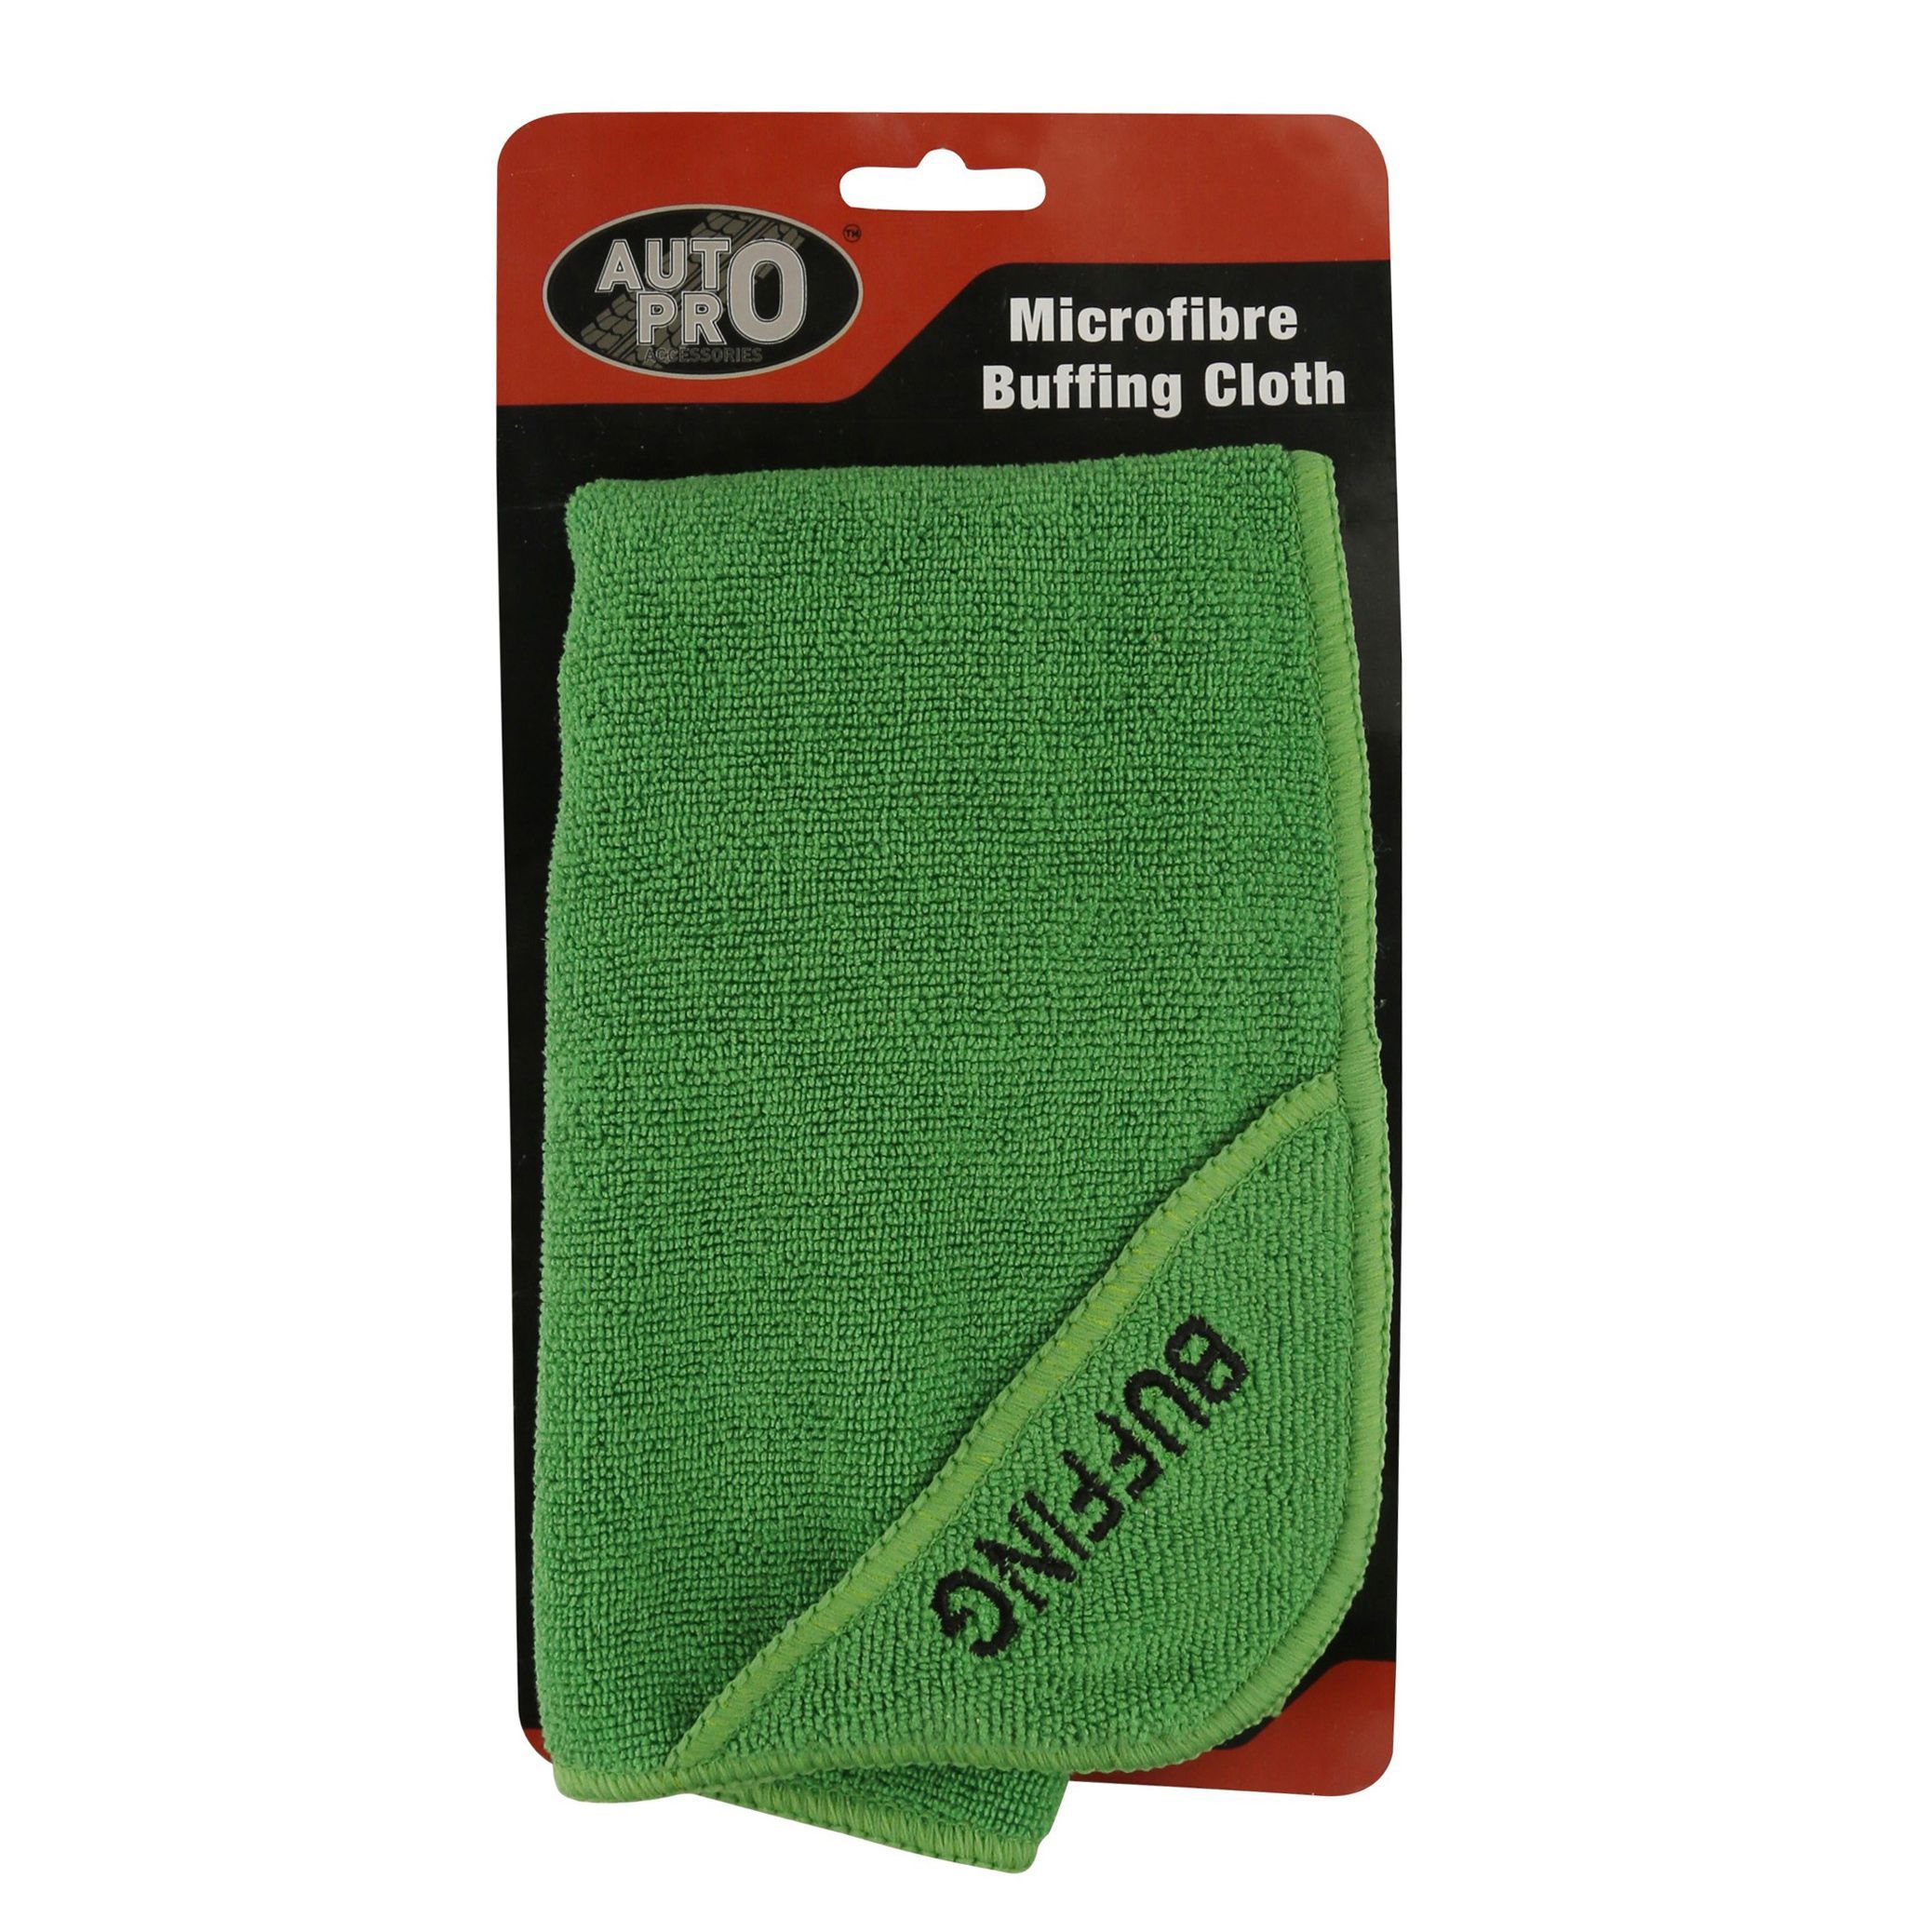 AutoPro accessories Buffing cloth